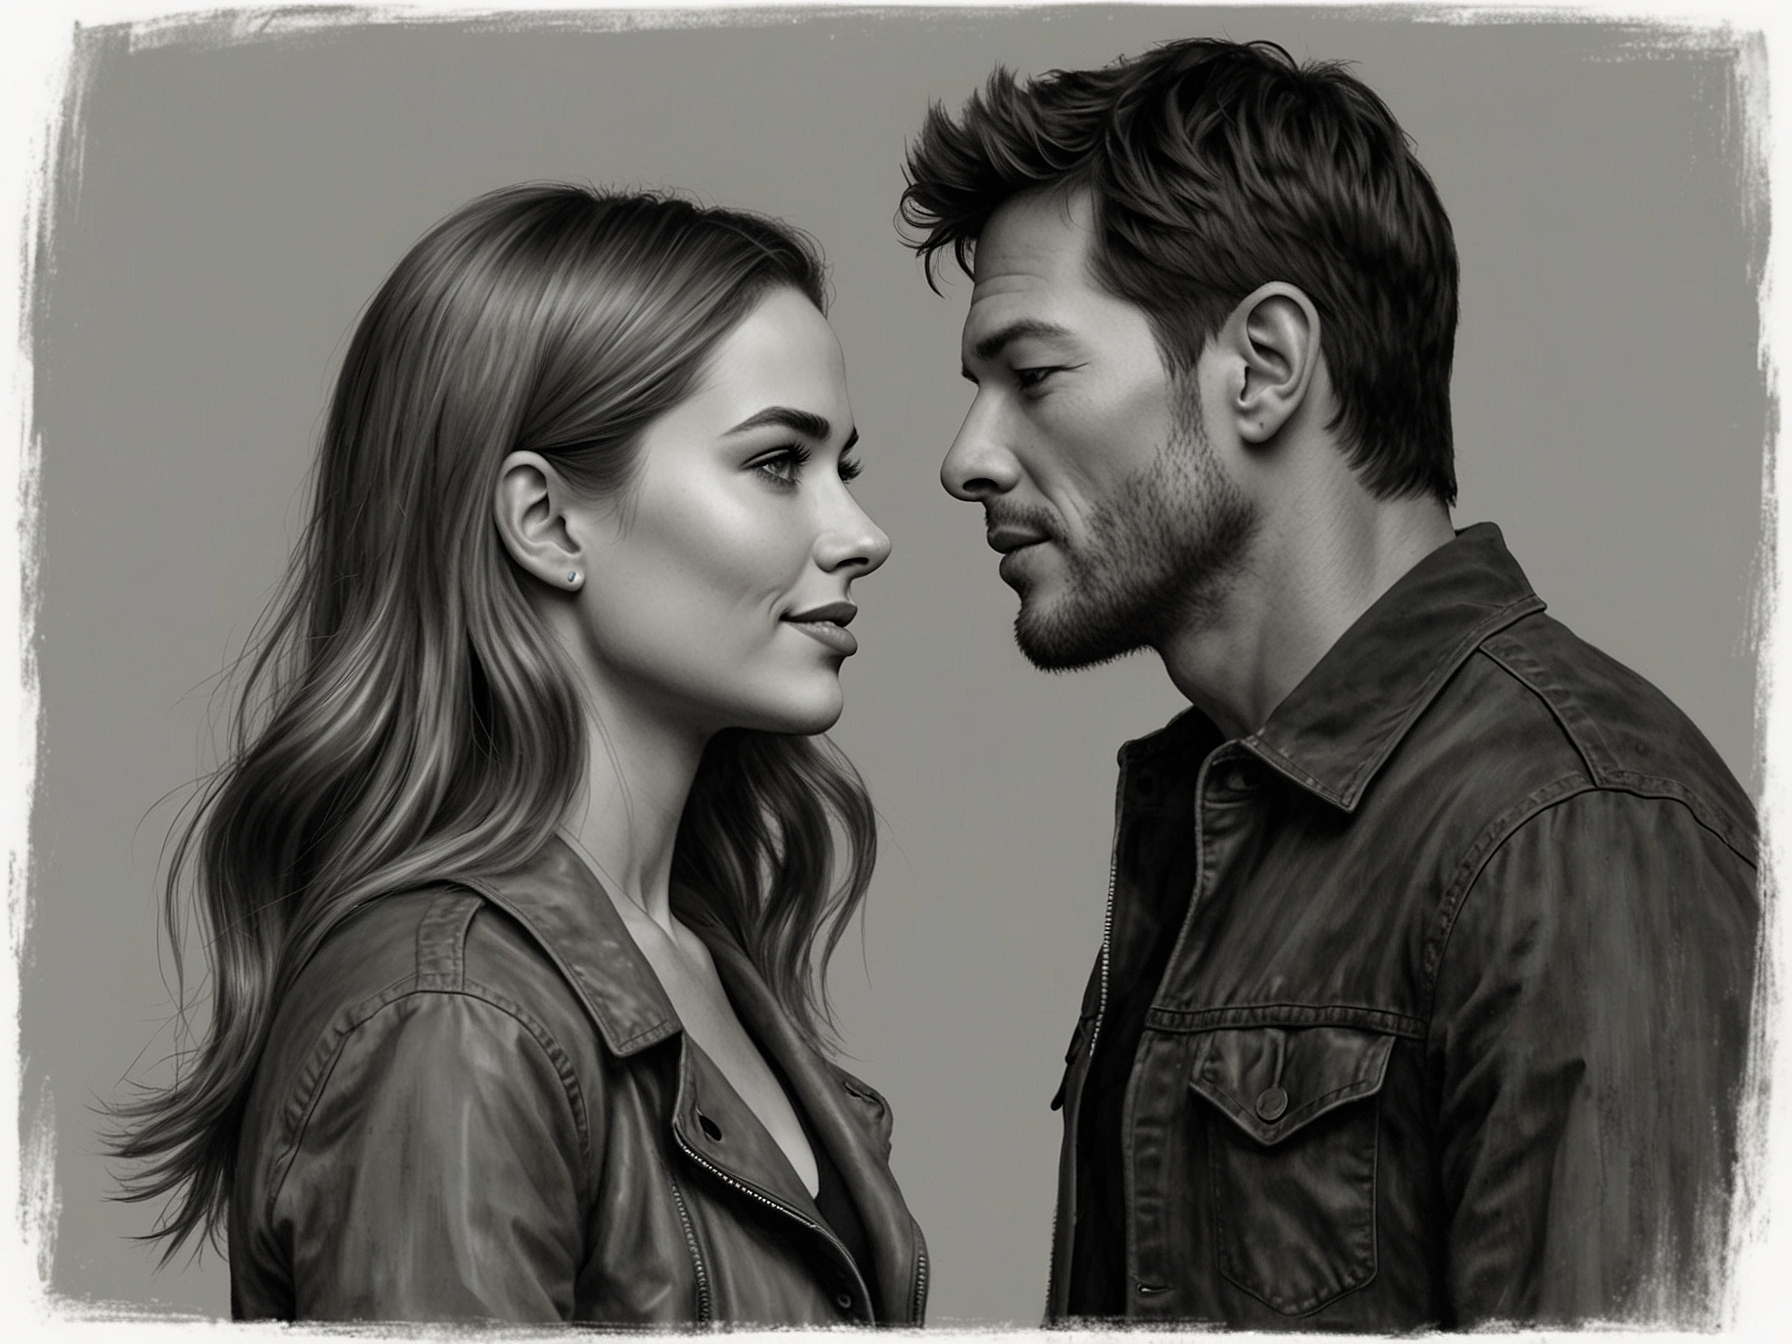 A moment between Harry Connick Jr. and Zoey Deutch, portraying the chemistry and blossoming romance between the rock star and the young music journalist.